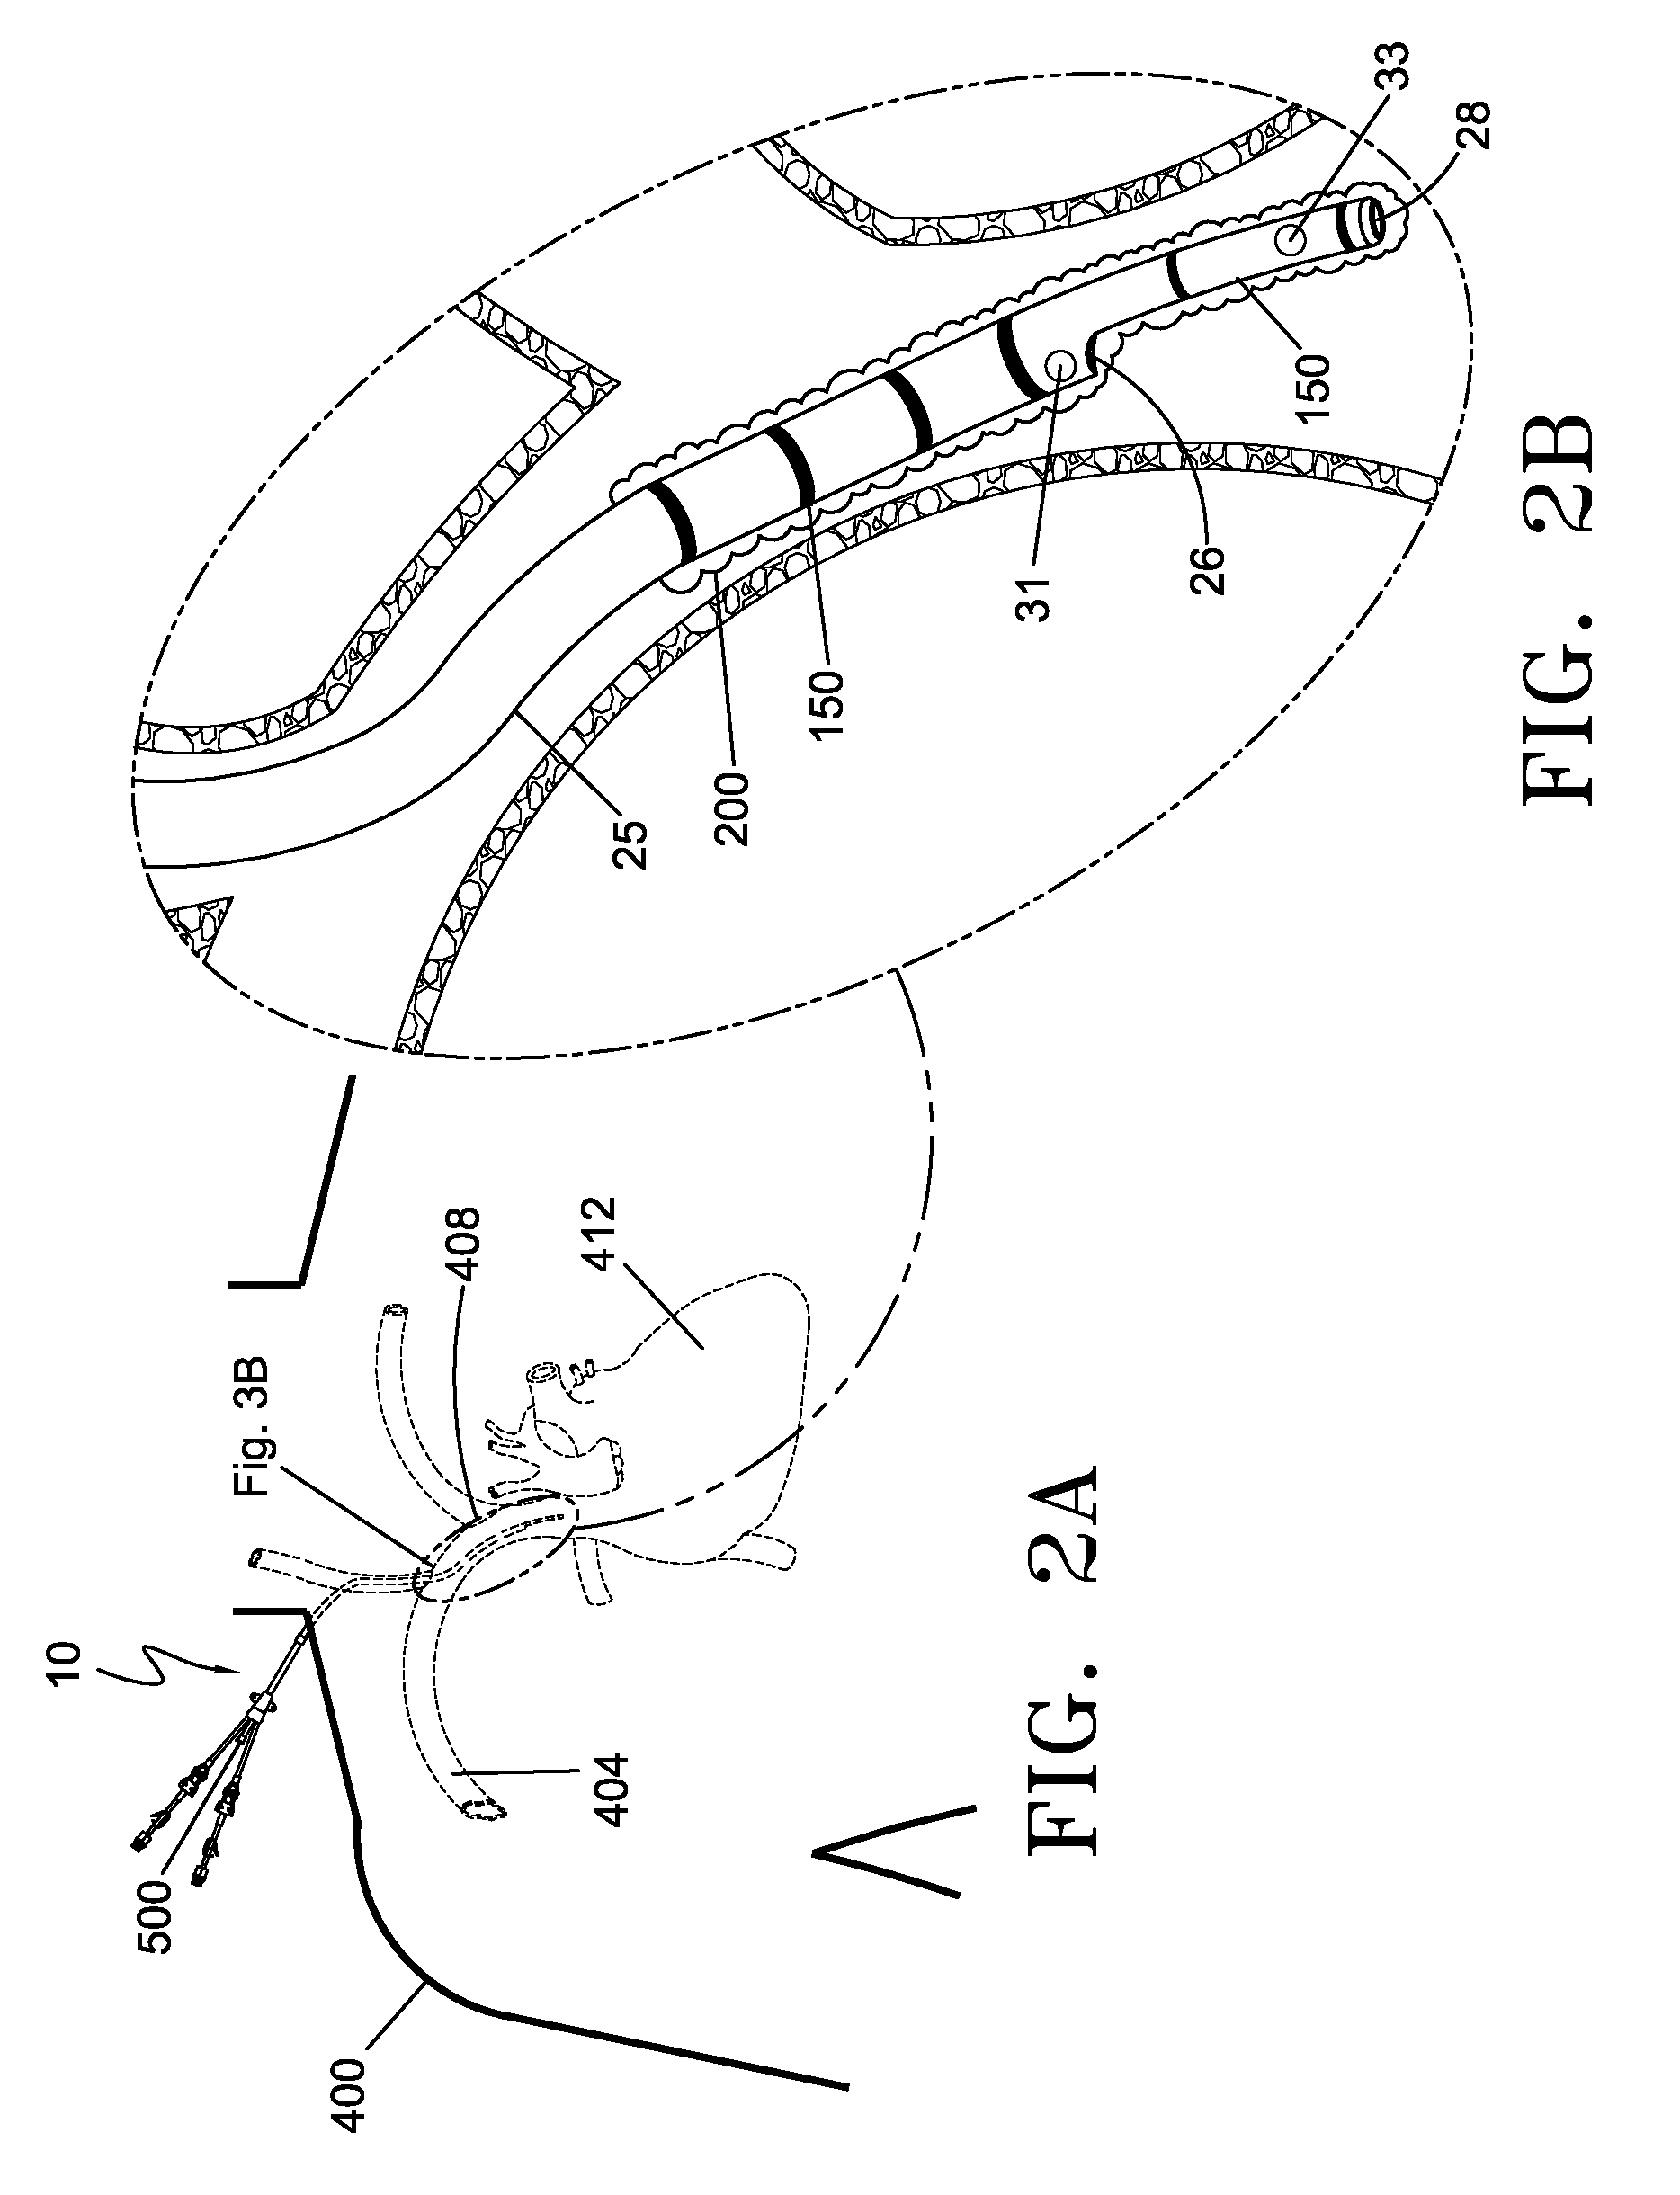 Device and Method for the Ablation of Fibrin Sheath Formation on a Venous Catheter